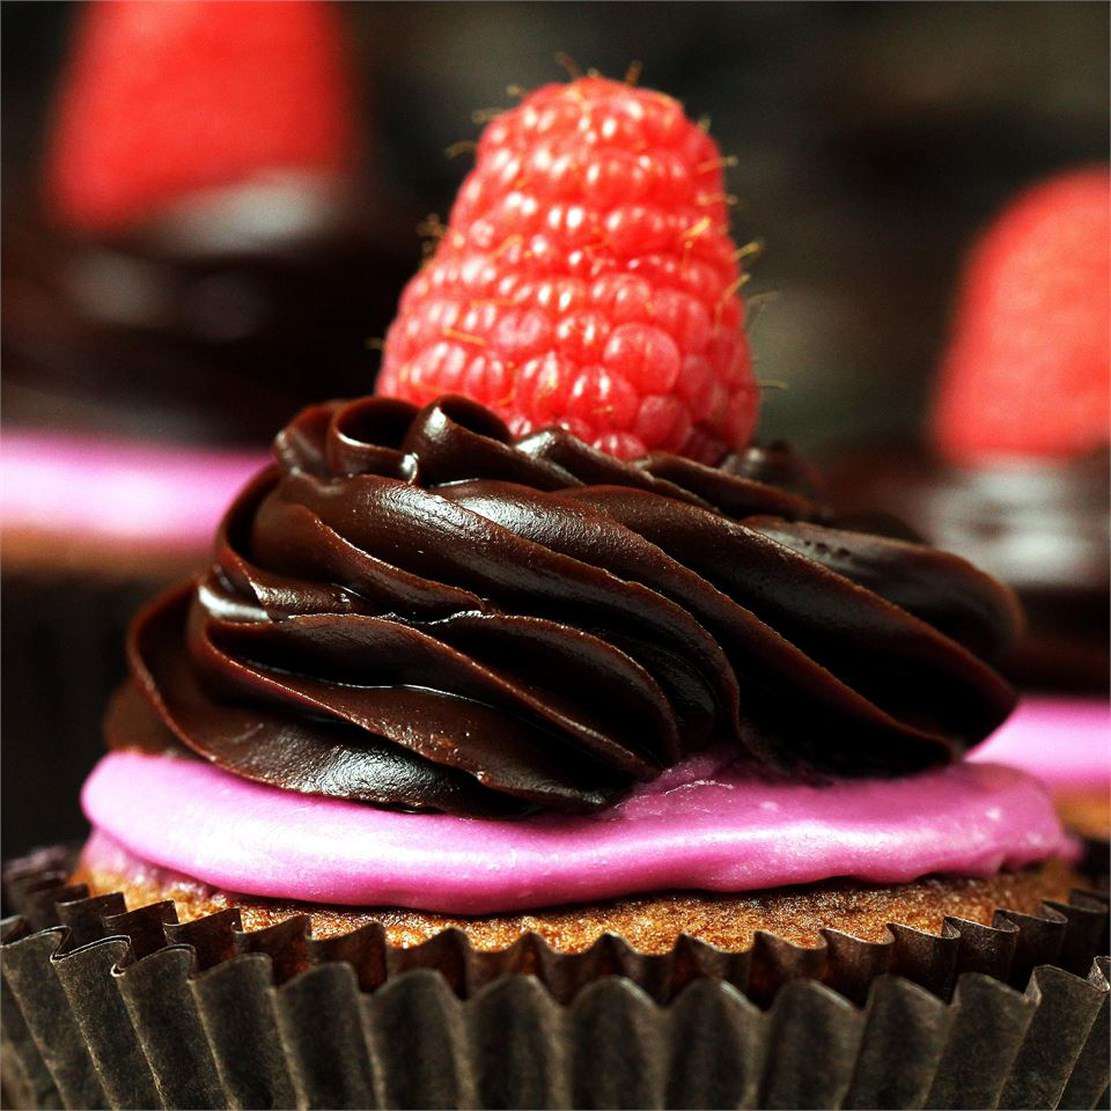 chocolate ganache icing piped on top of a cupcake with raspberry garnish